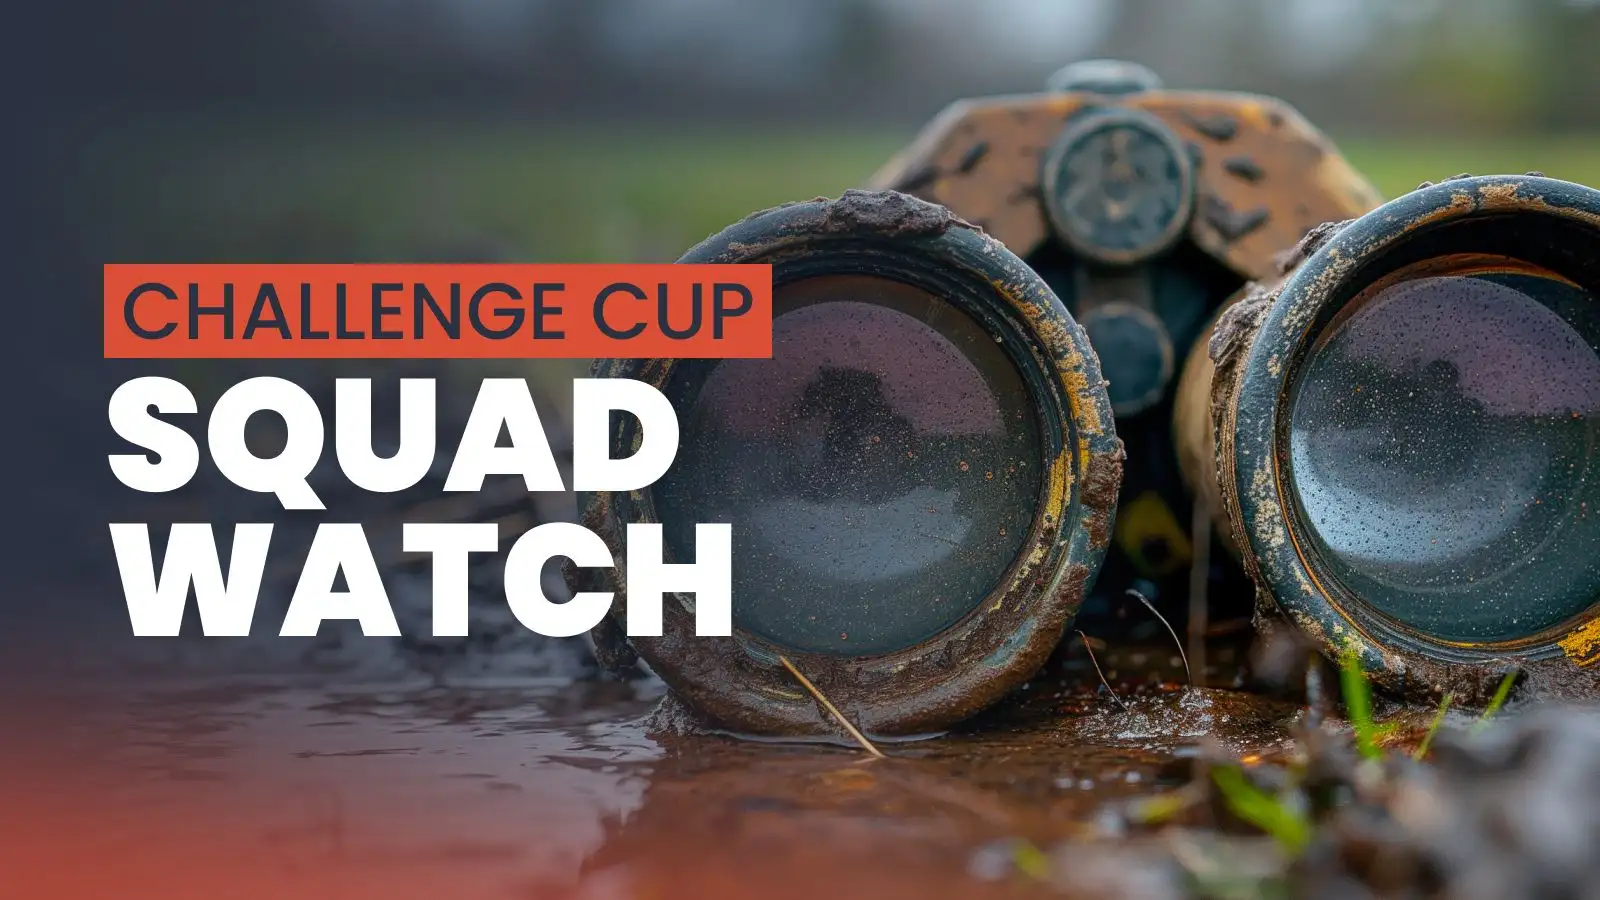 Challenge Cup squad watch